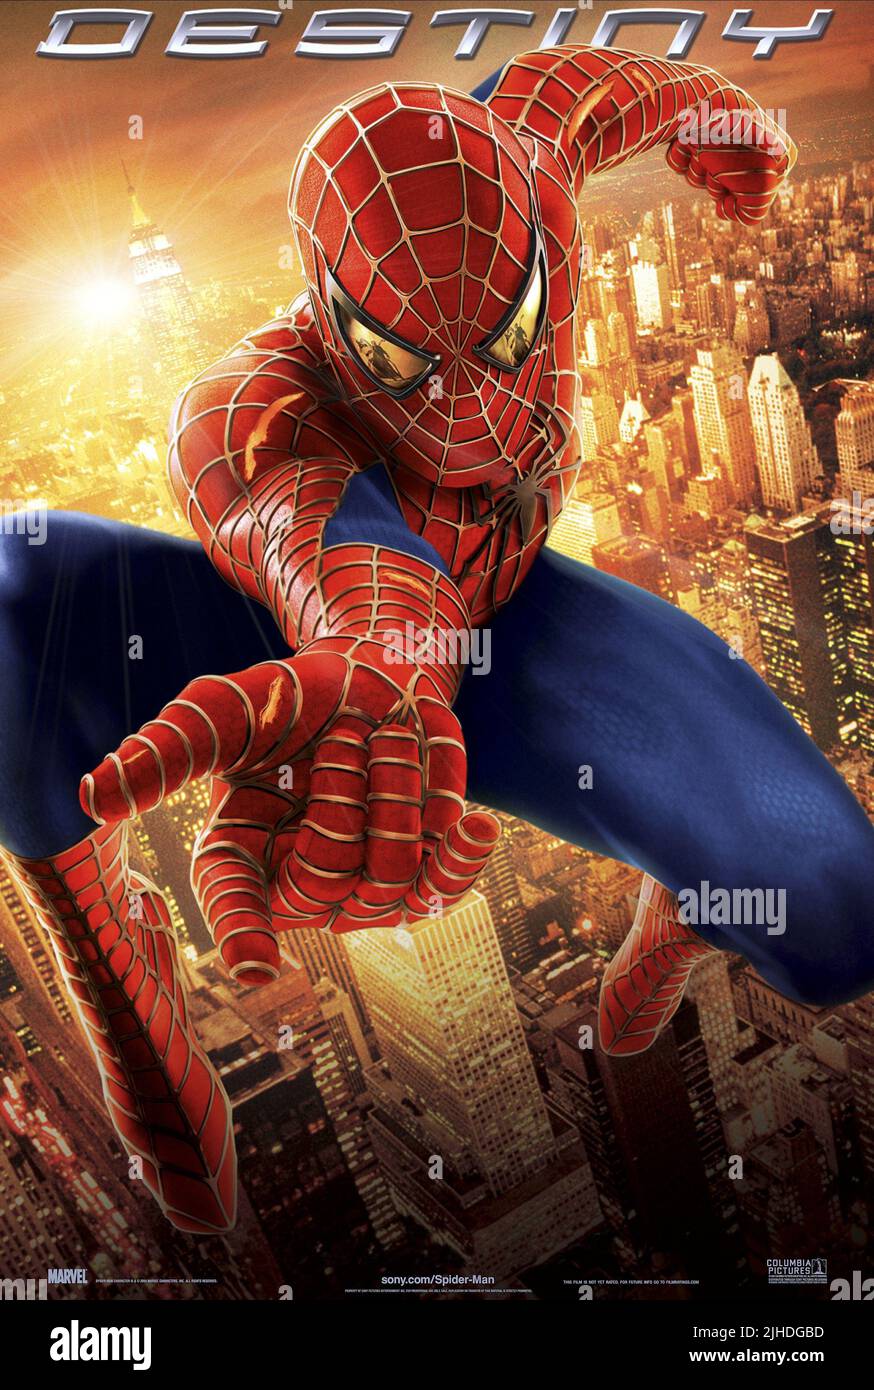 TOBEY MAGUIRE POSTER, SPIDER-MAN 2, 2004 Stock Photo